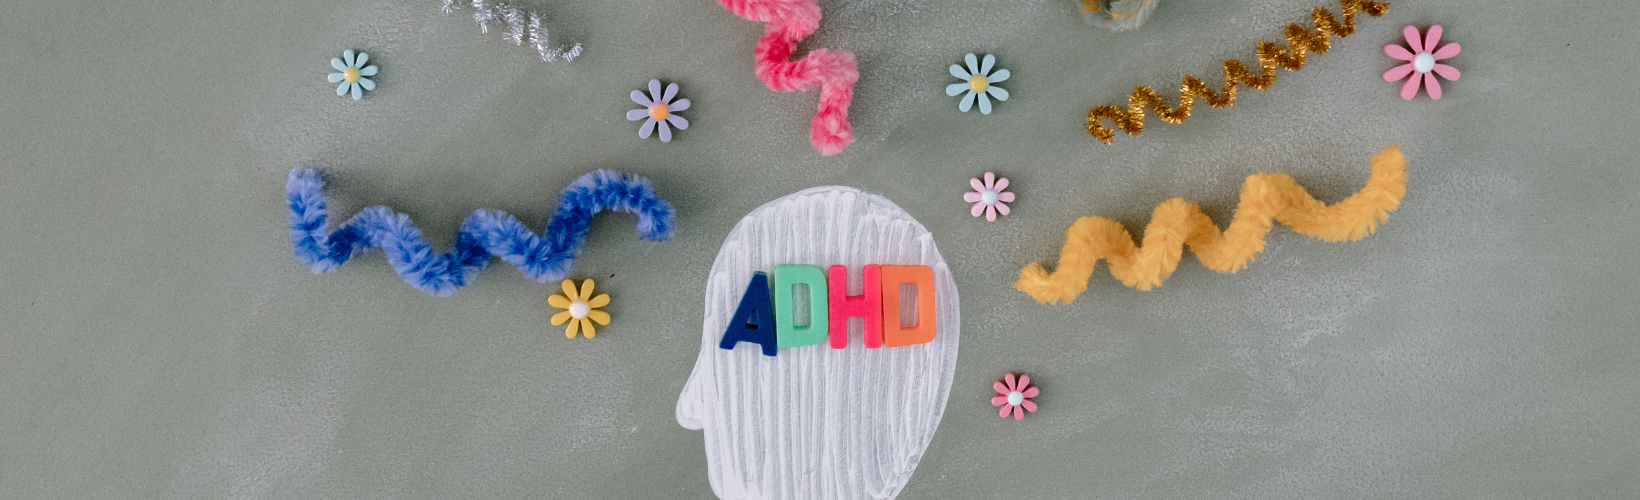 Introducing ADHD: Causes, Symptoms and Effects on Kids